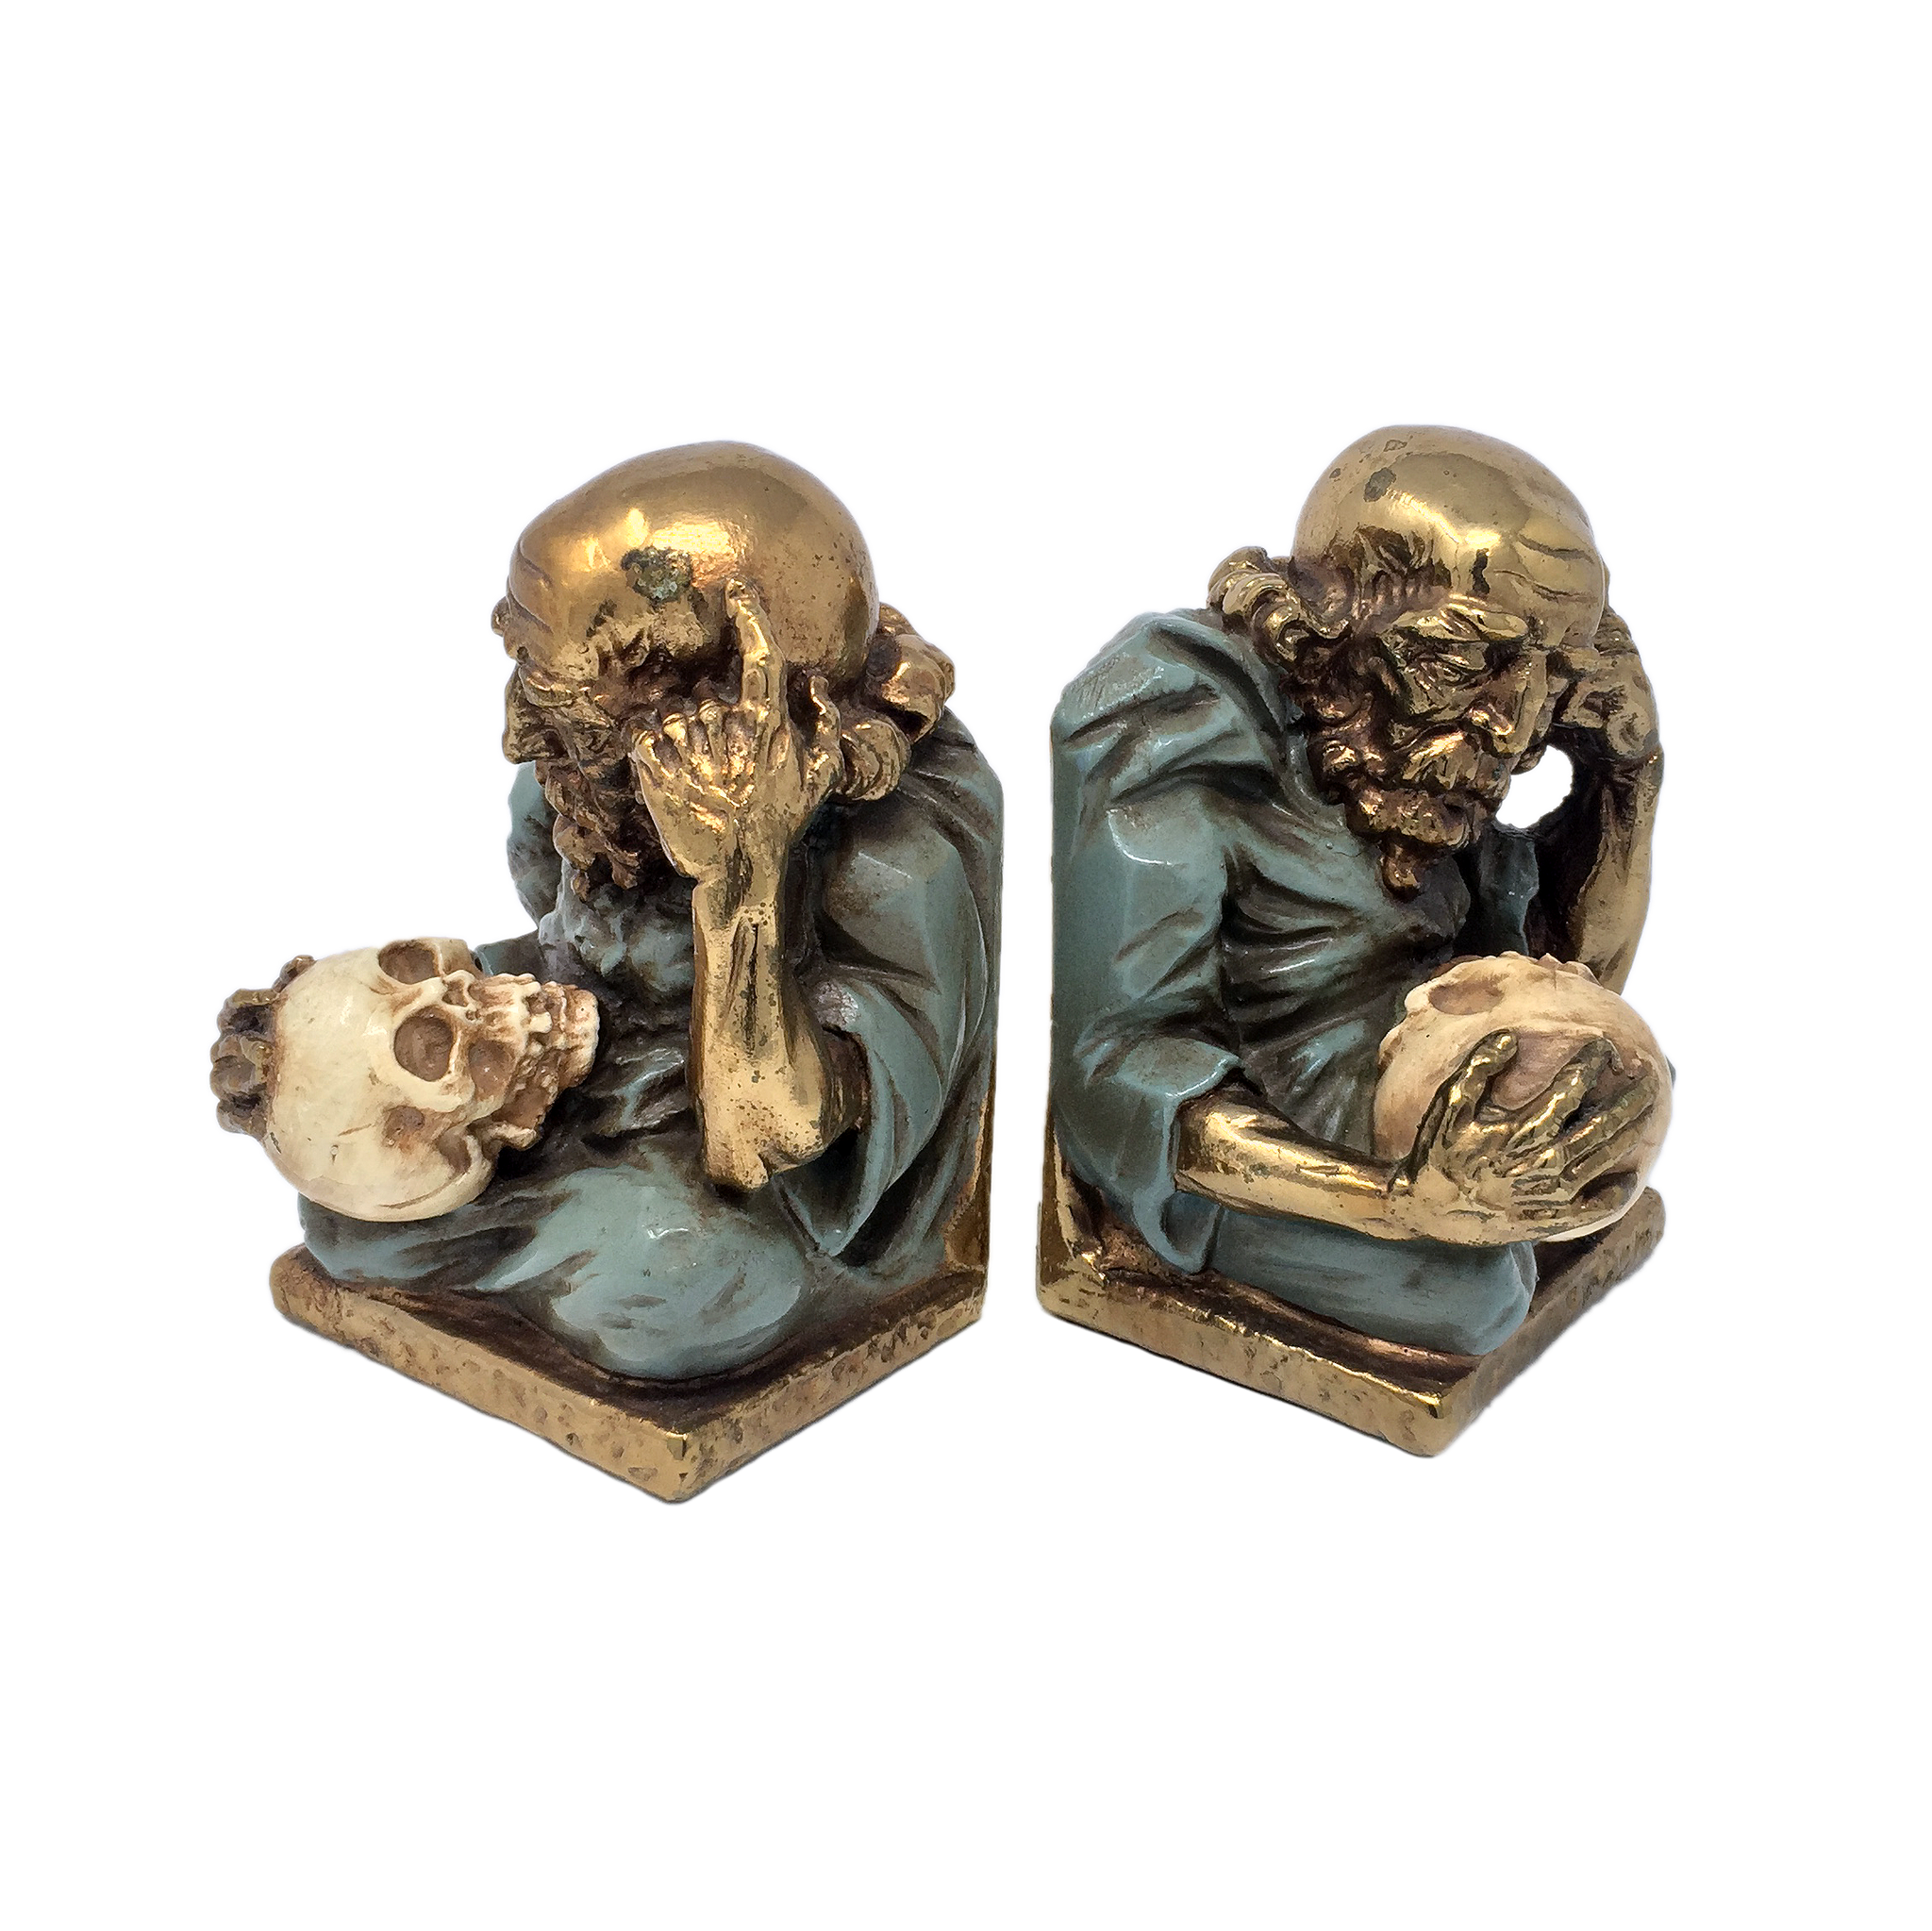 Antique bronze-clad alchemist with skull bookends by Marion Bronze circa 1922